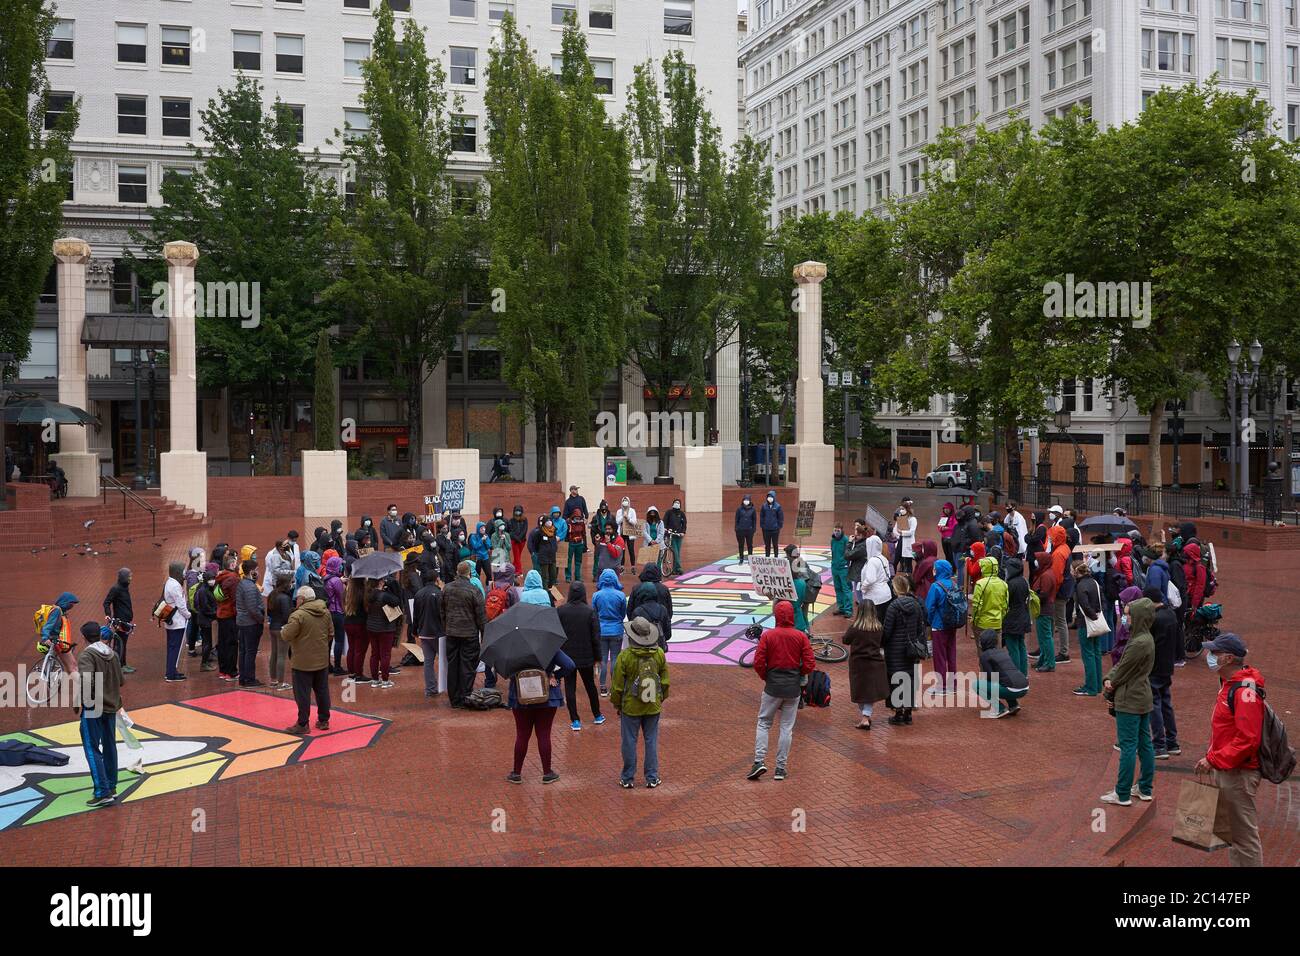 BLM demonstrators gather at the Pioneer Courthouse Square in downtown Portland, Oregon, on Saturday, Jun 13, 2020. Stock Photo